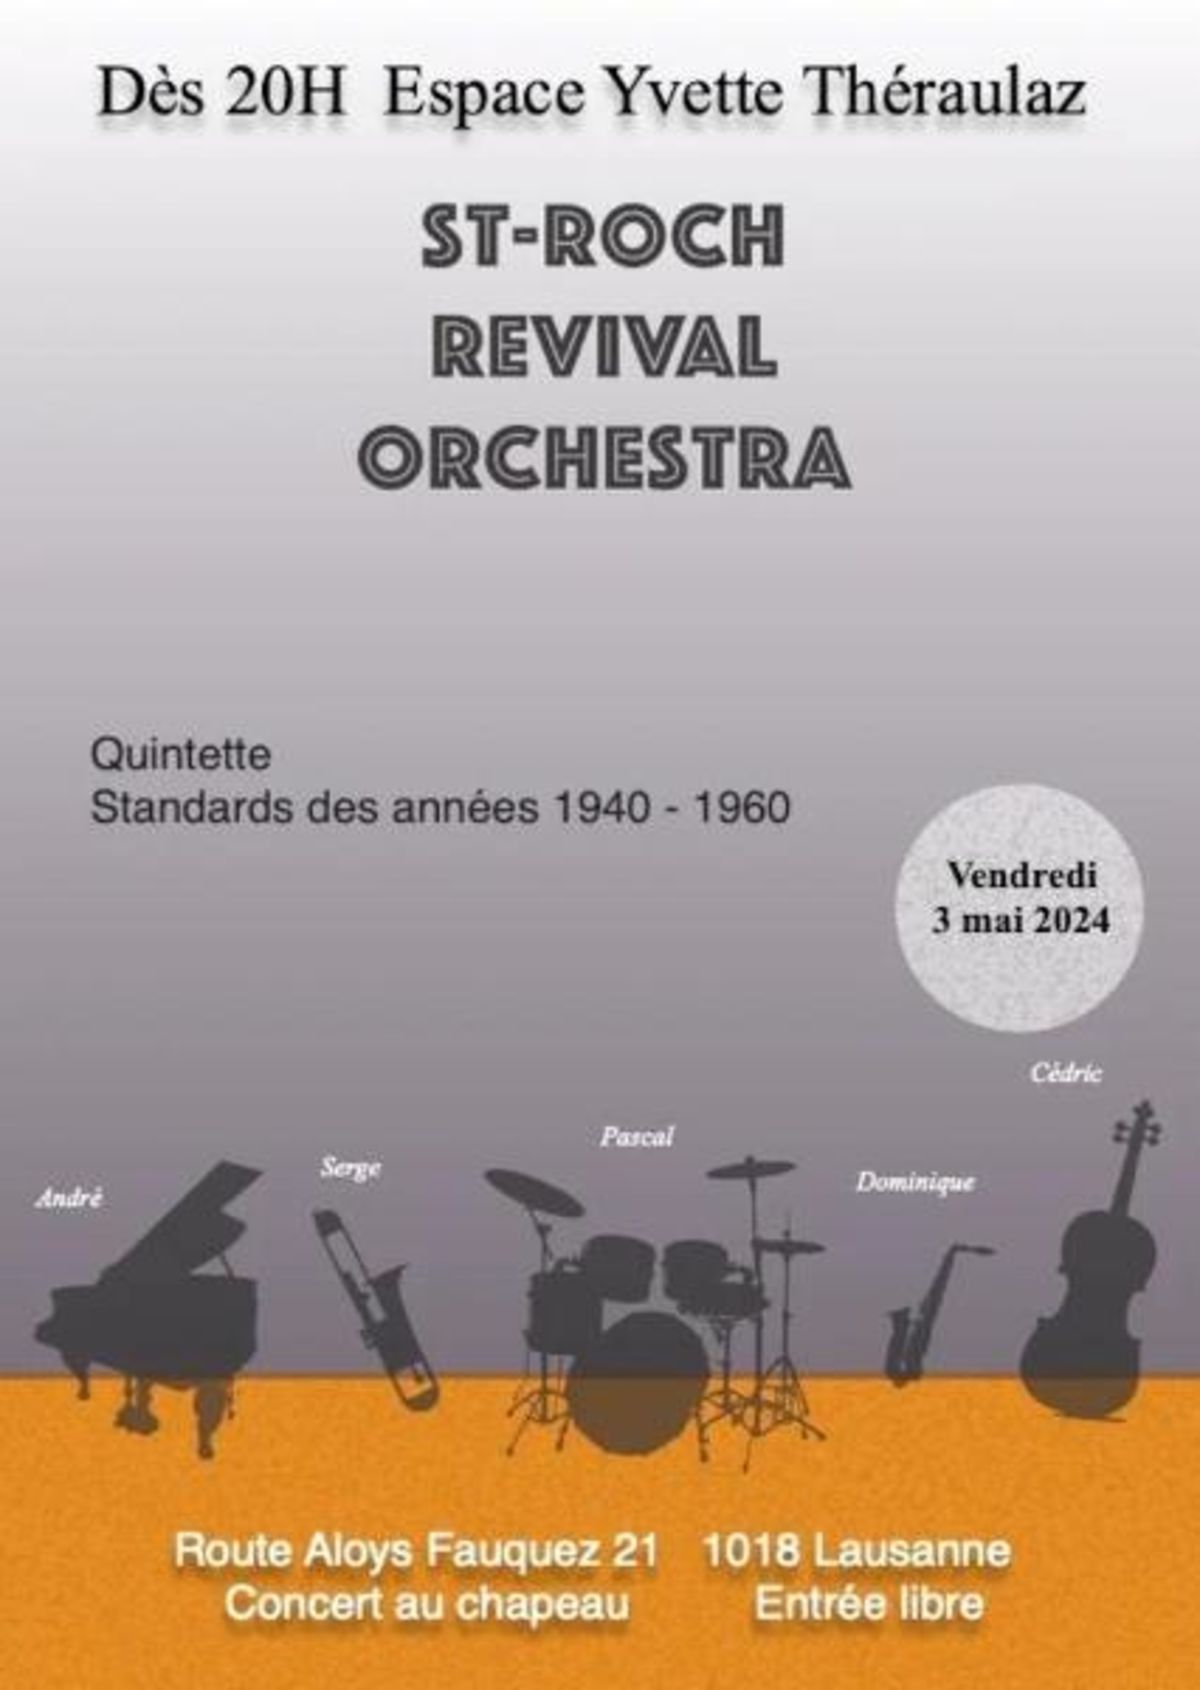 St-Roch Revival Orchestra